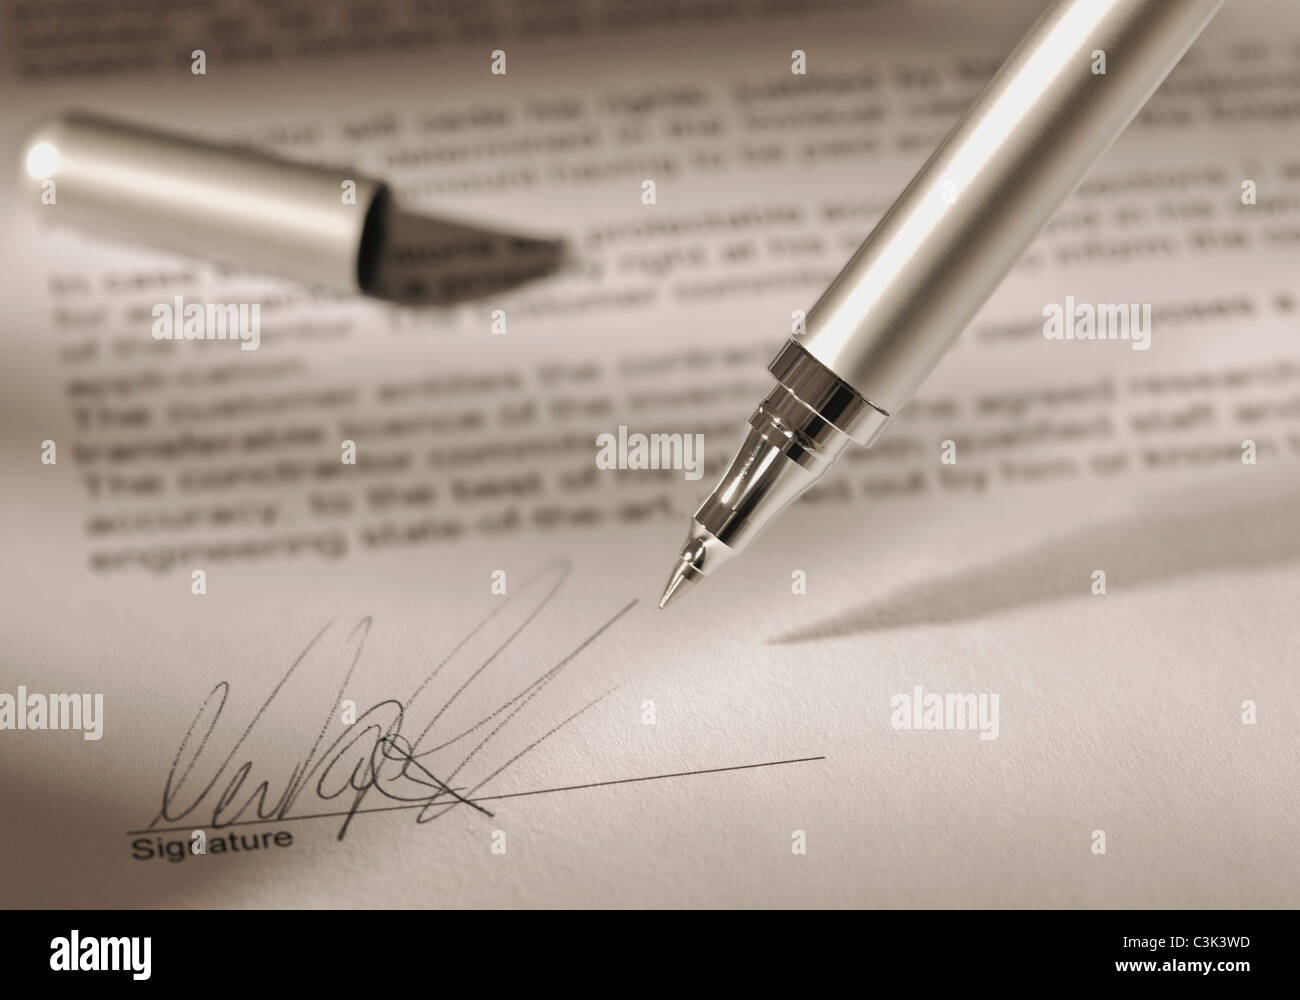 Pen with signature on contract Stock Photo